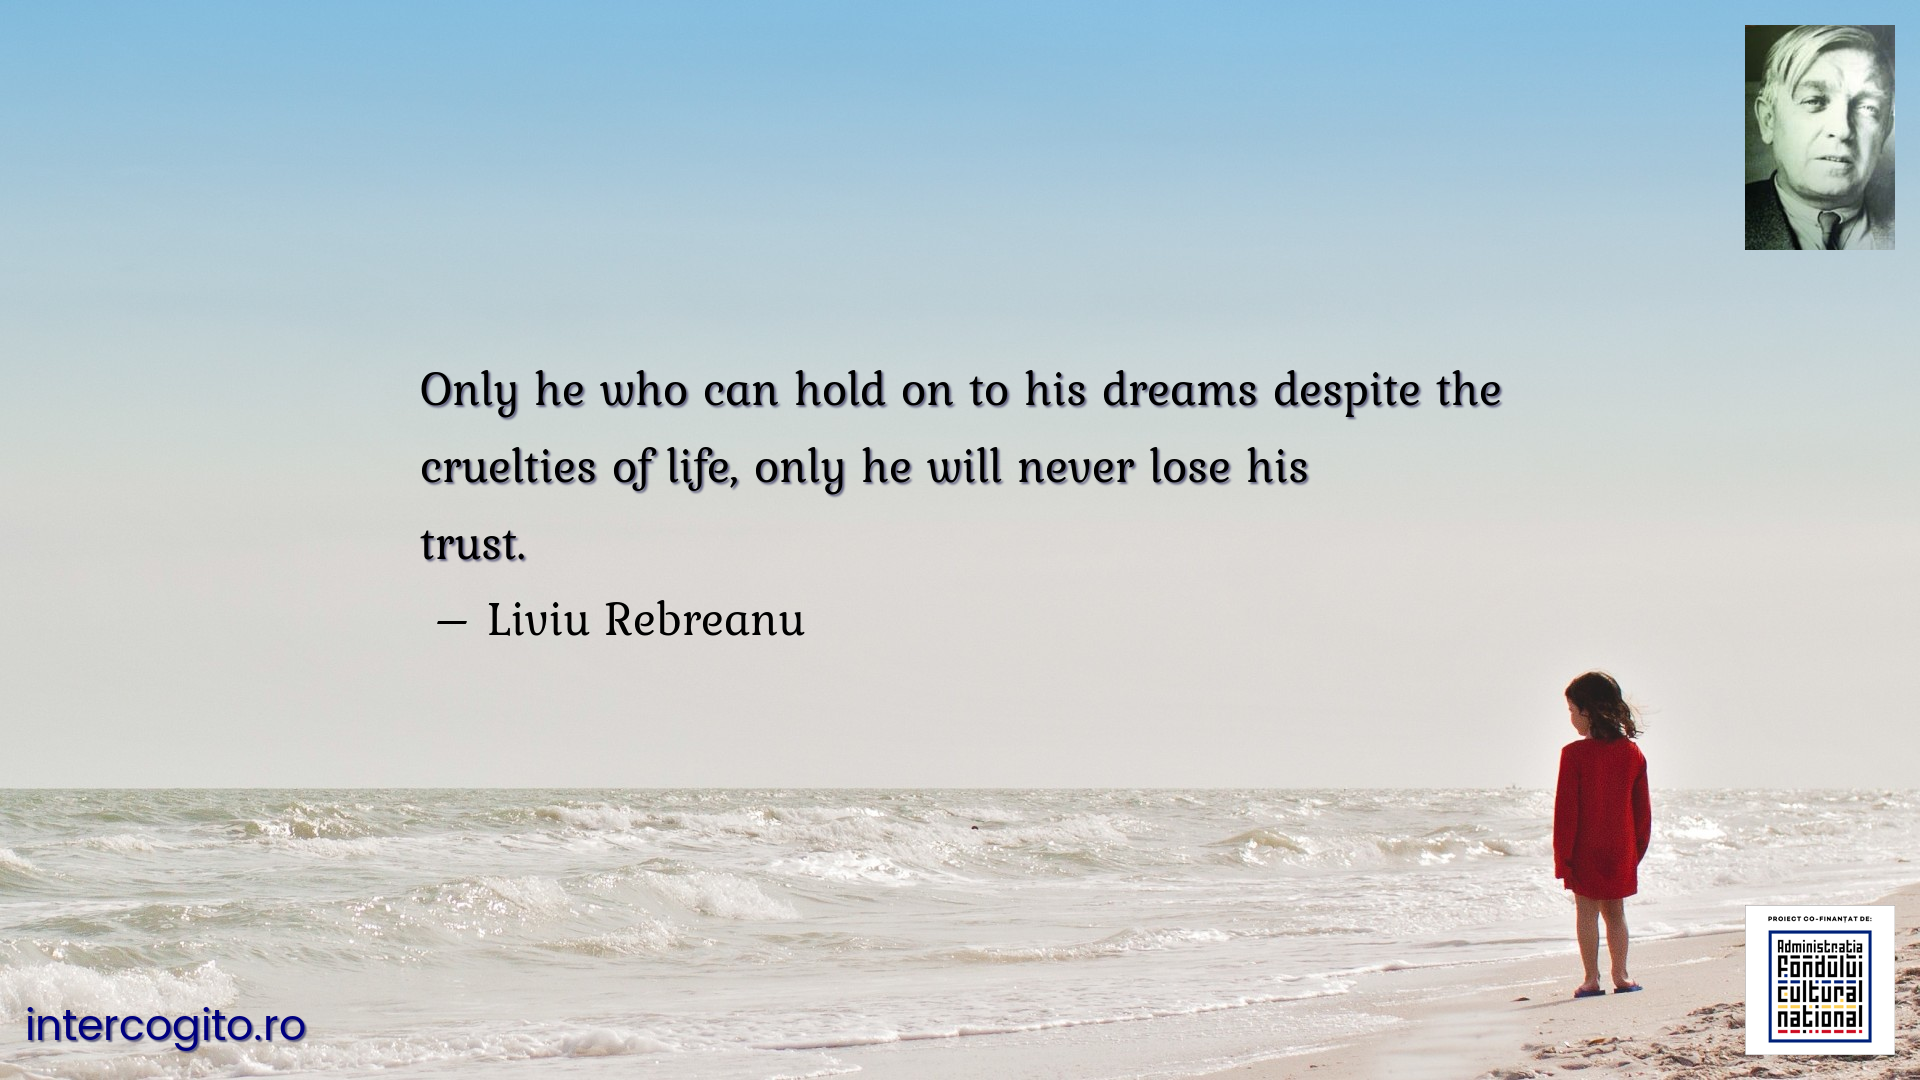 Only he who can hold on to his dreams despite the cruelties of life, only he will never lose his trust.